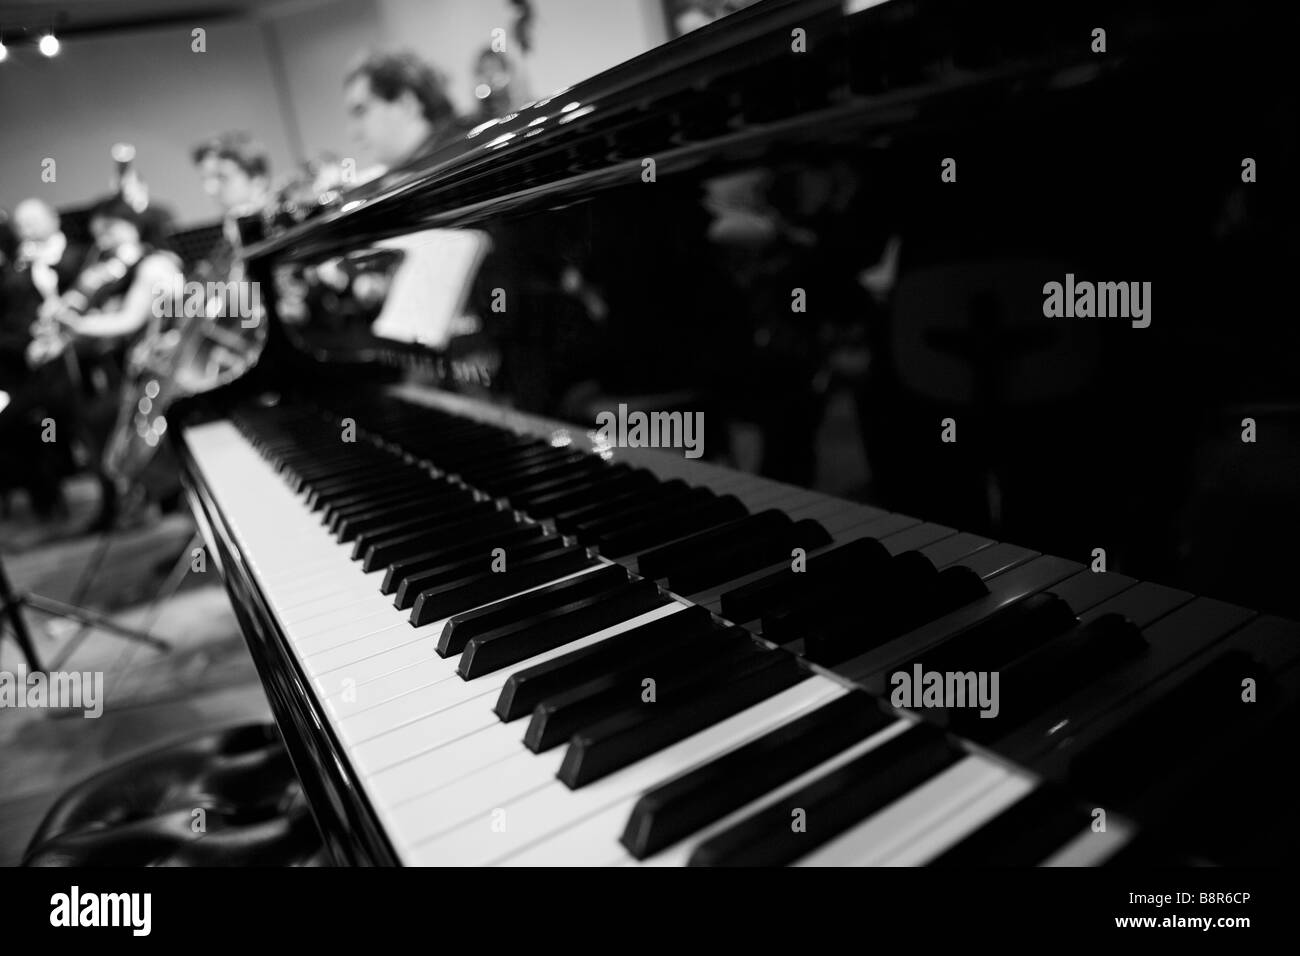 Black and White, Piano, Orchestra, Music, Sound, Instruments Stock Photo